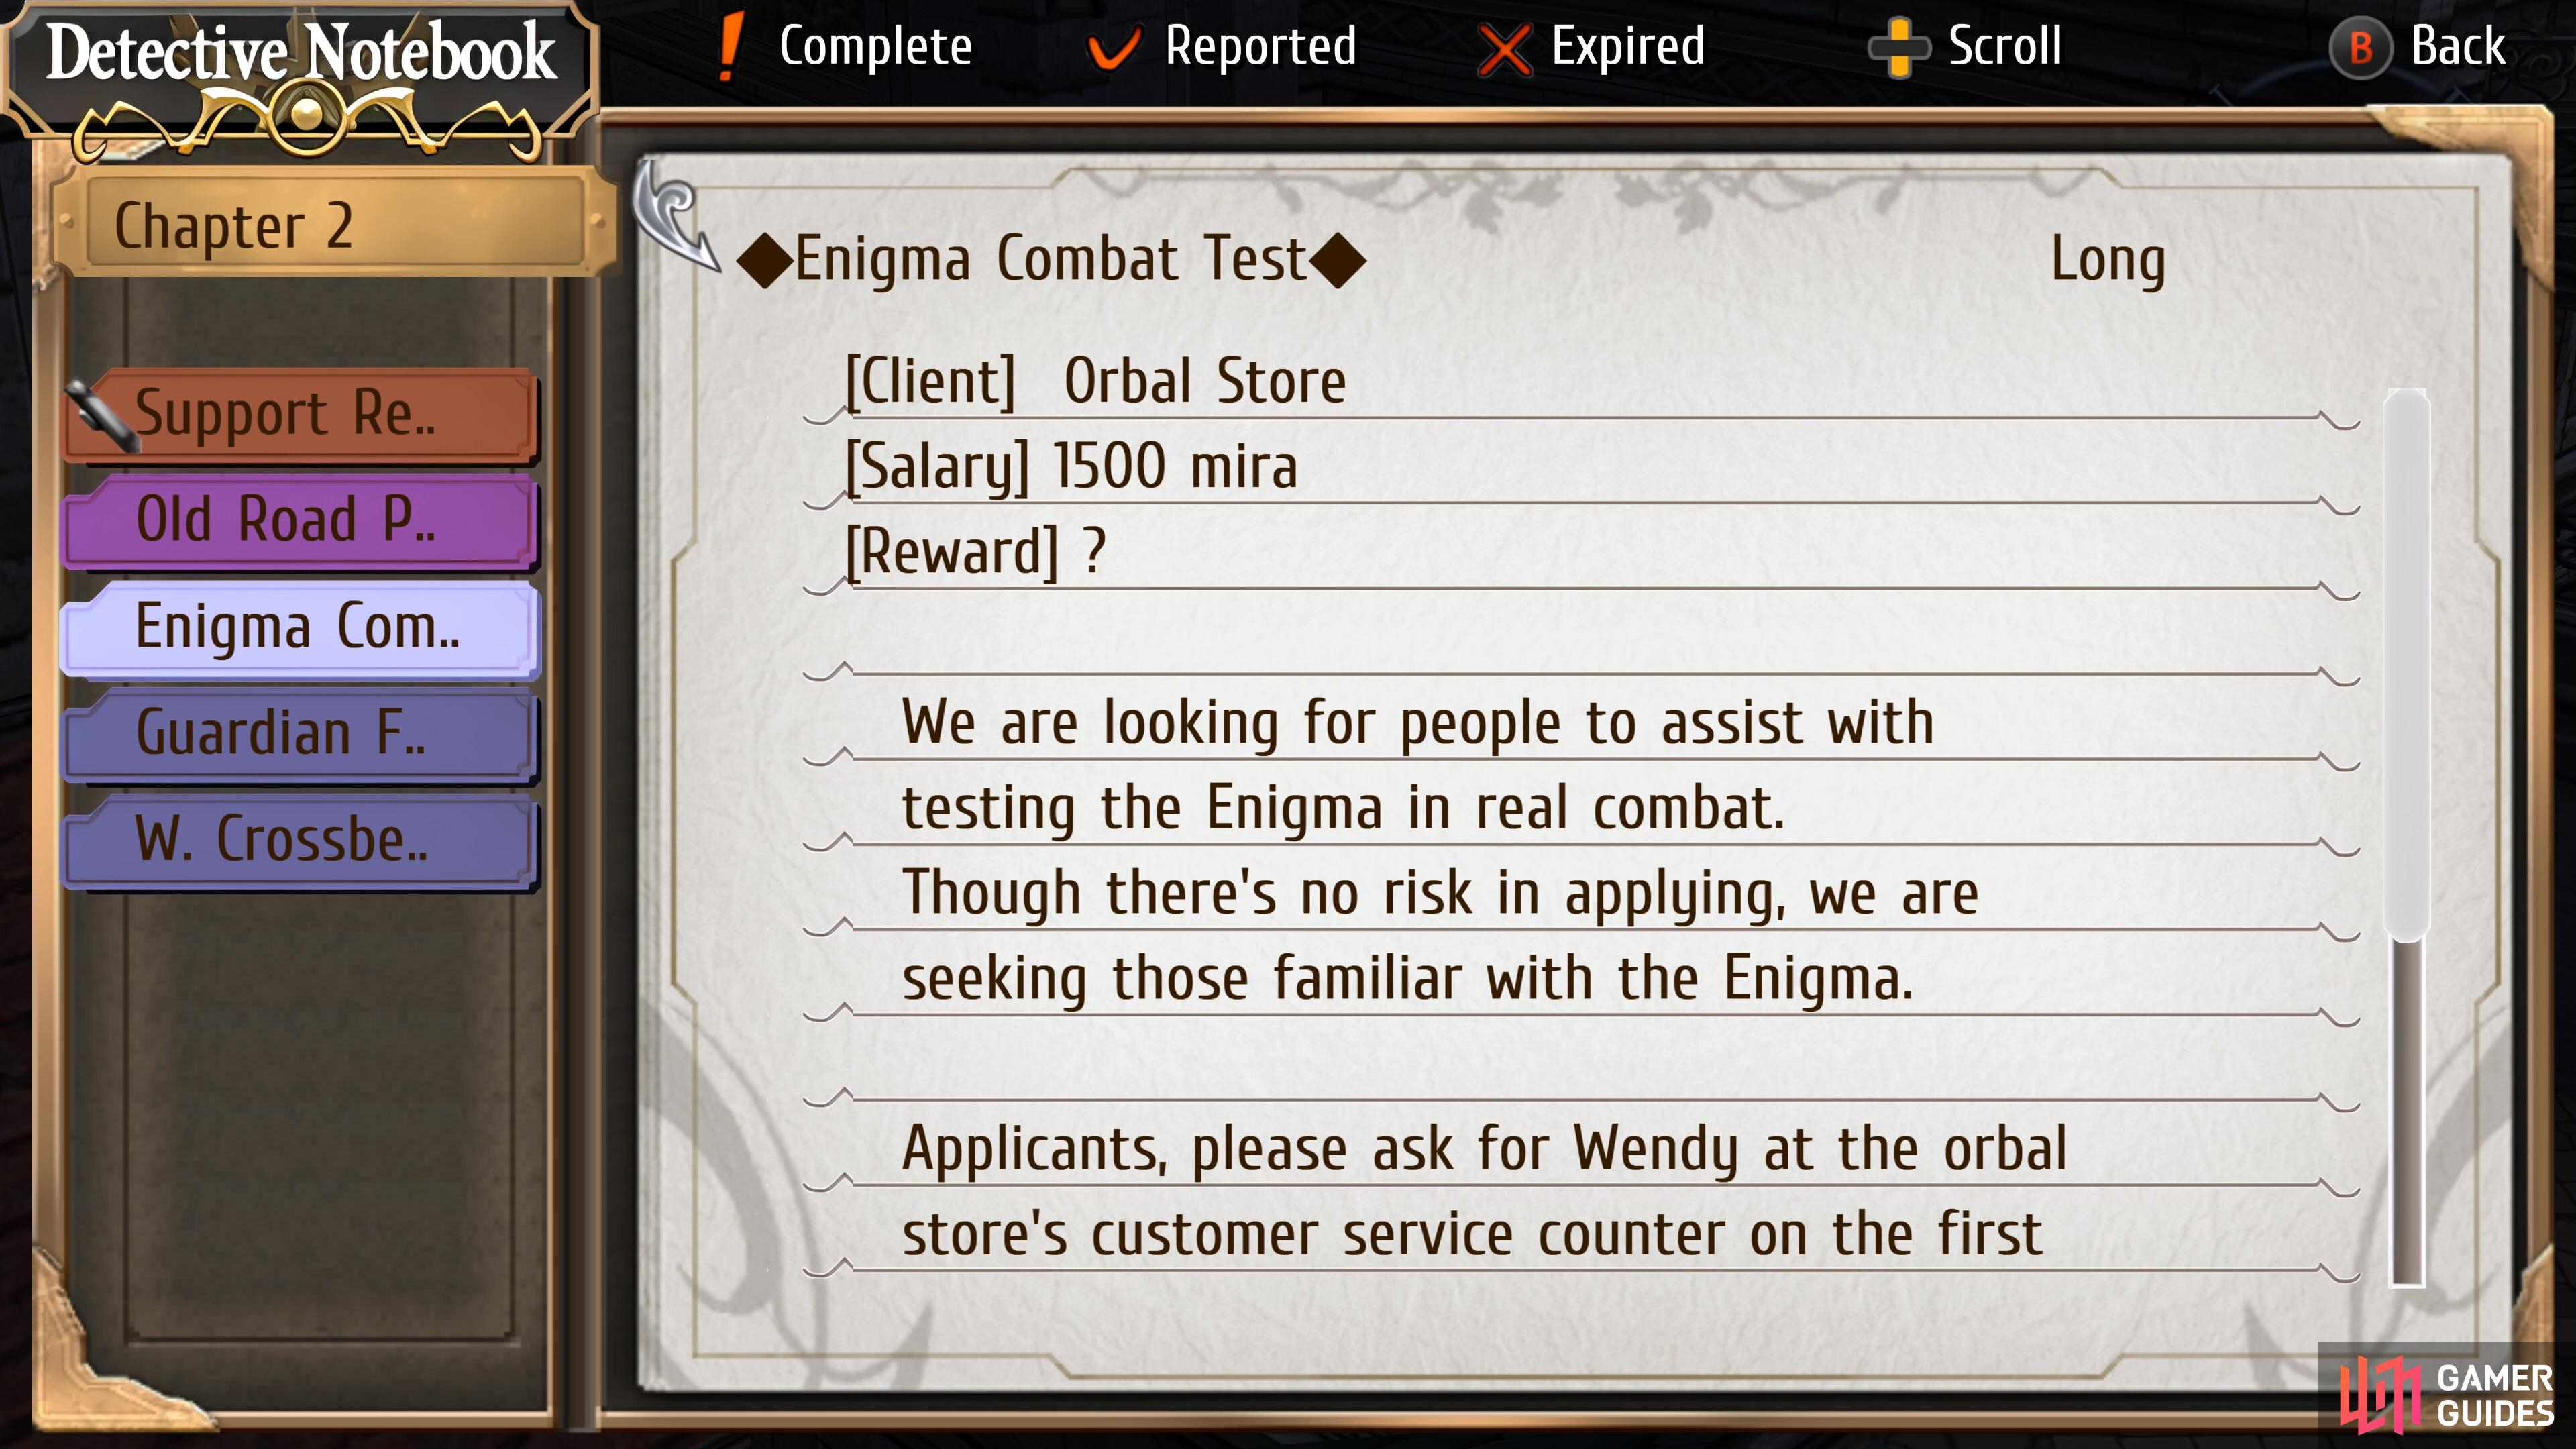 Enigma Combat Test is a Request on Day 1 of Chapter 2.